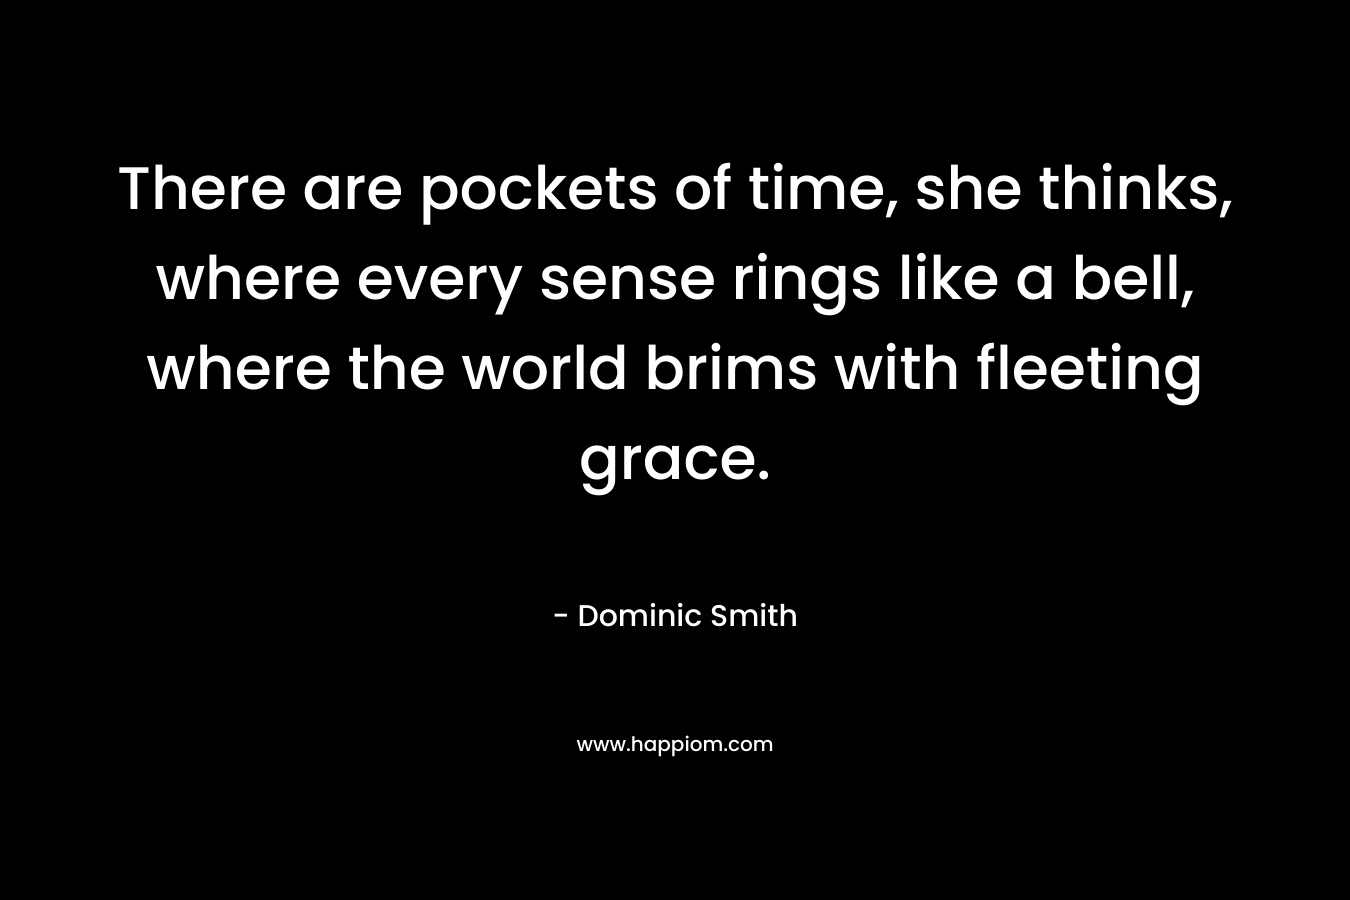 There are pockets of time, she thinks, where every sense rings like a bell, where the world brims with fleeting grace. – Dominic Smith